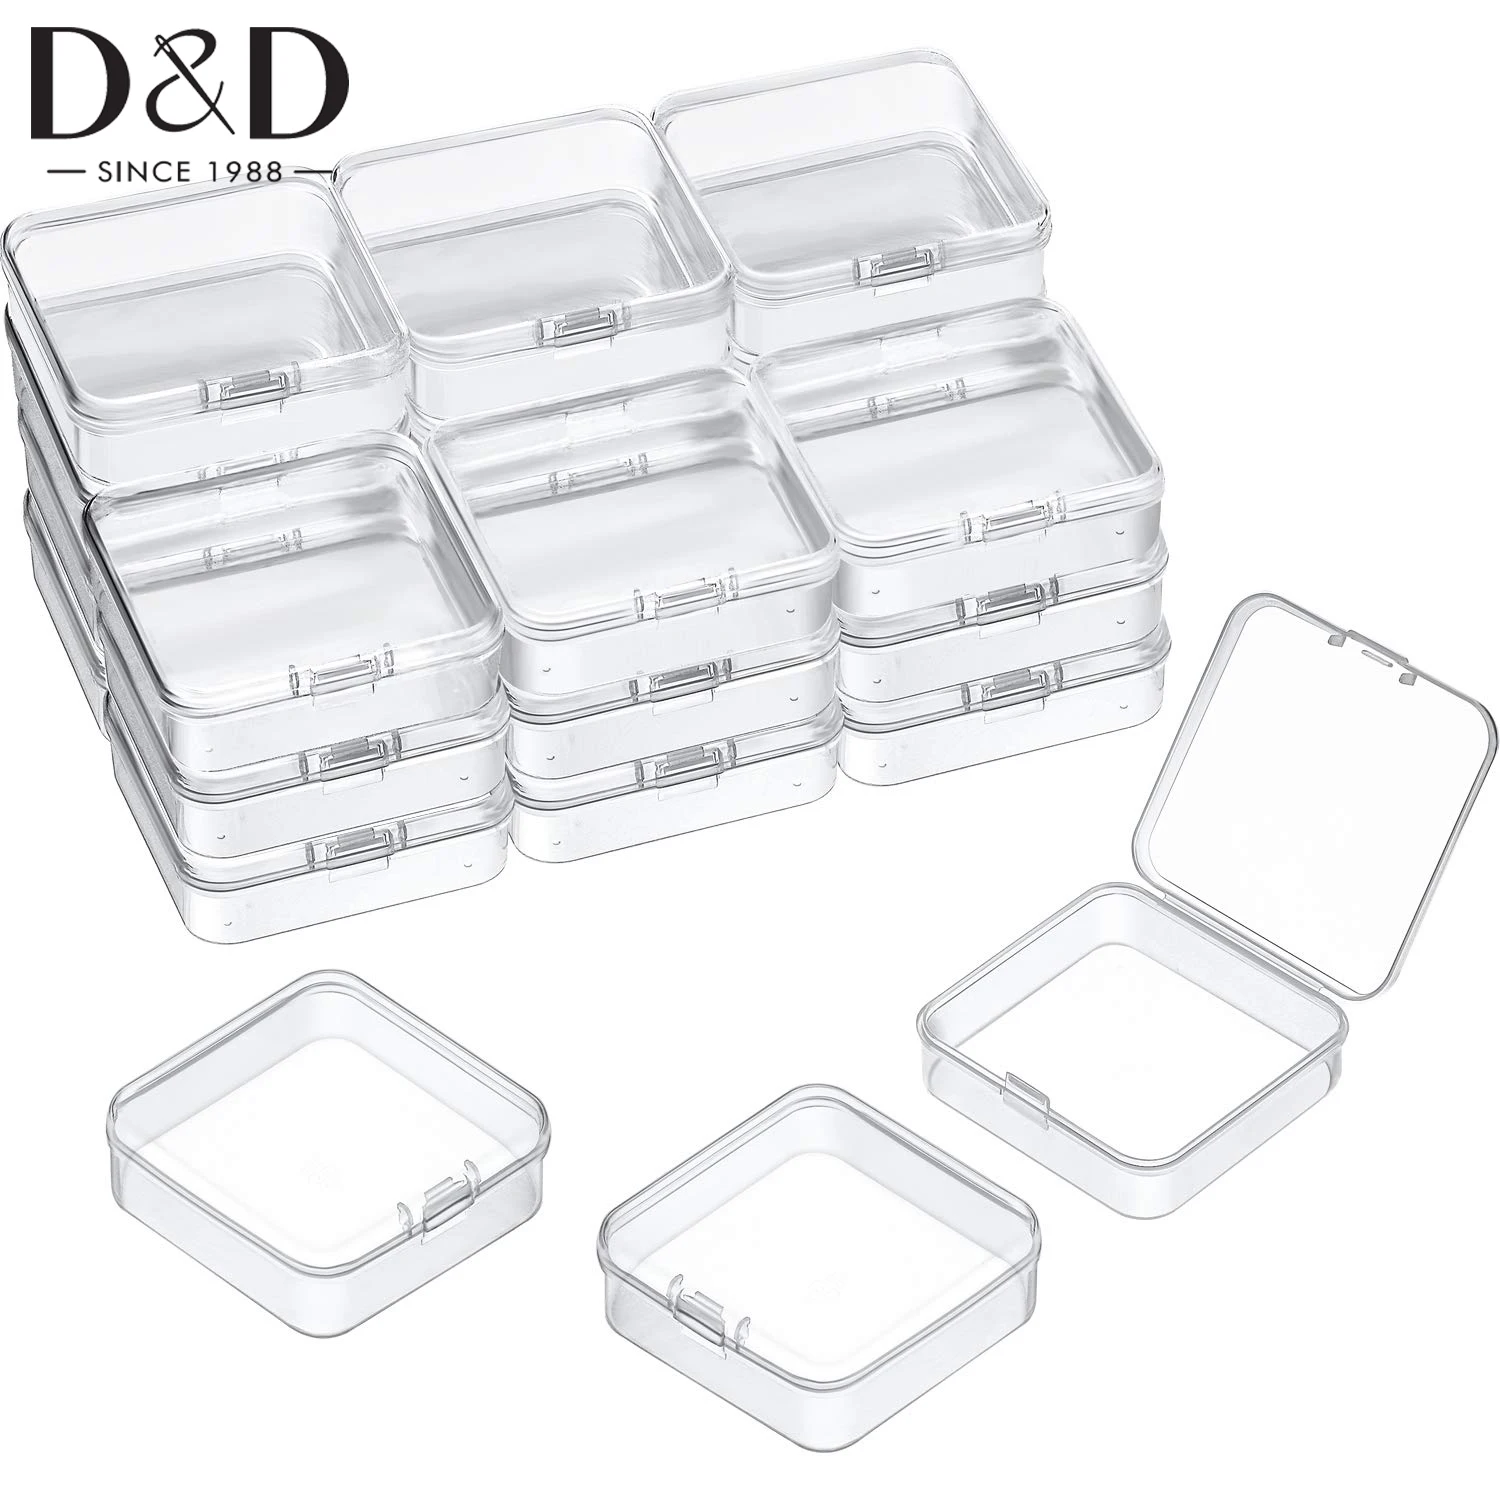 5Pcs Small Transparent Plastic Case Square Storage Box For Jewelry Beads Earrings DIY Crafts Sewing Supplies